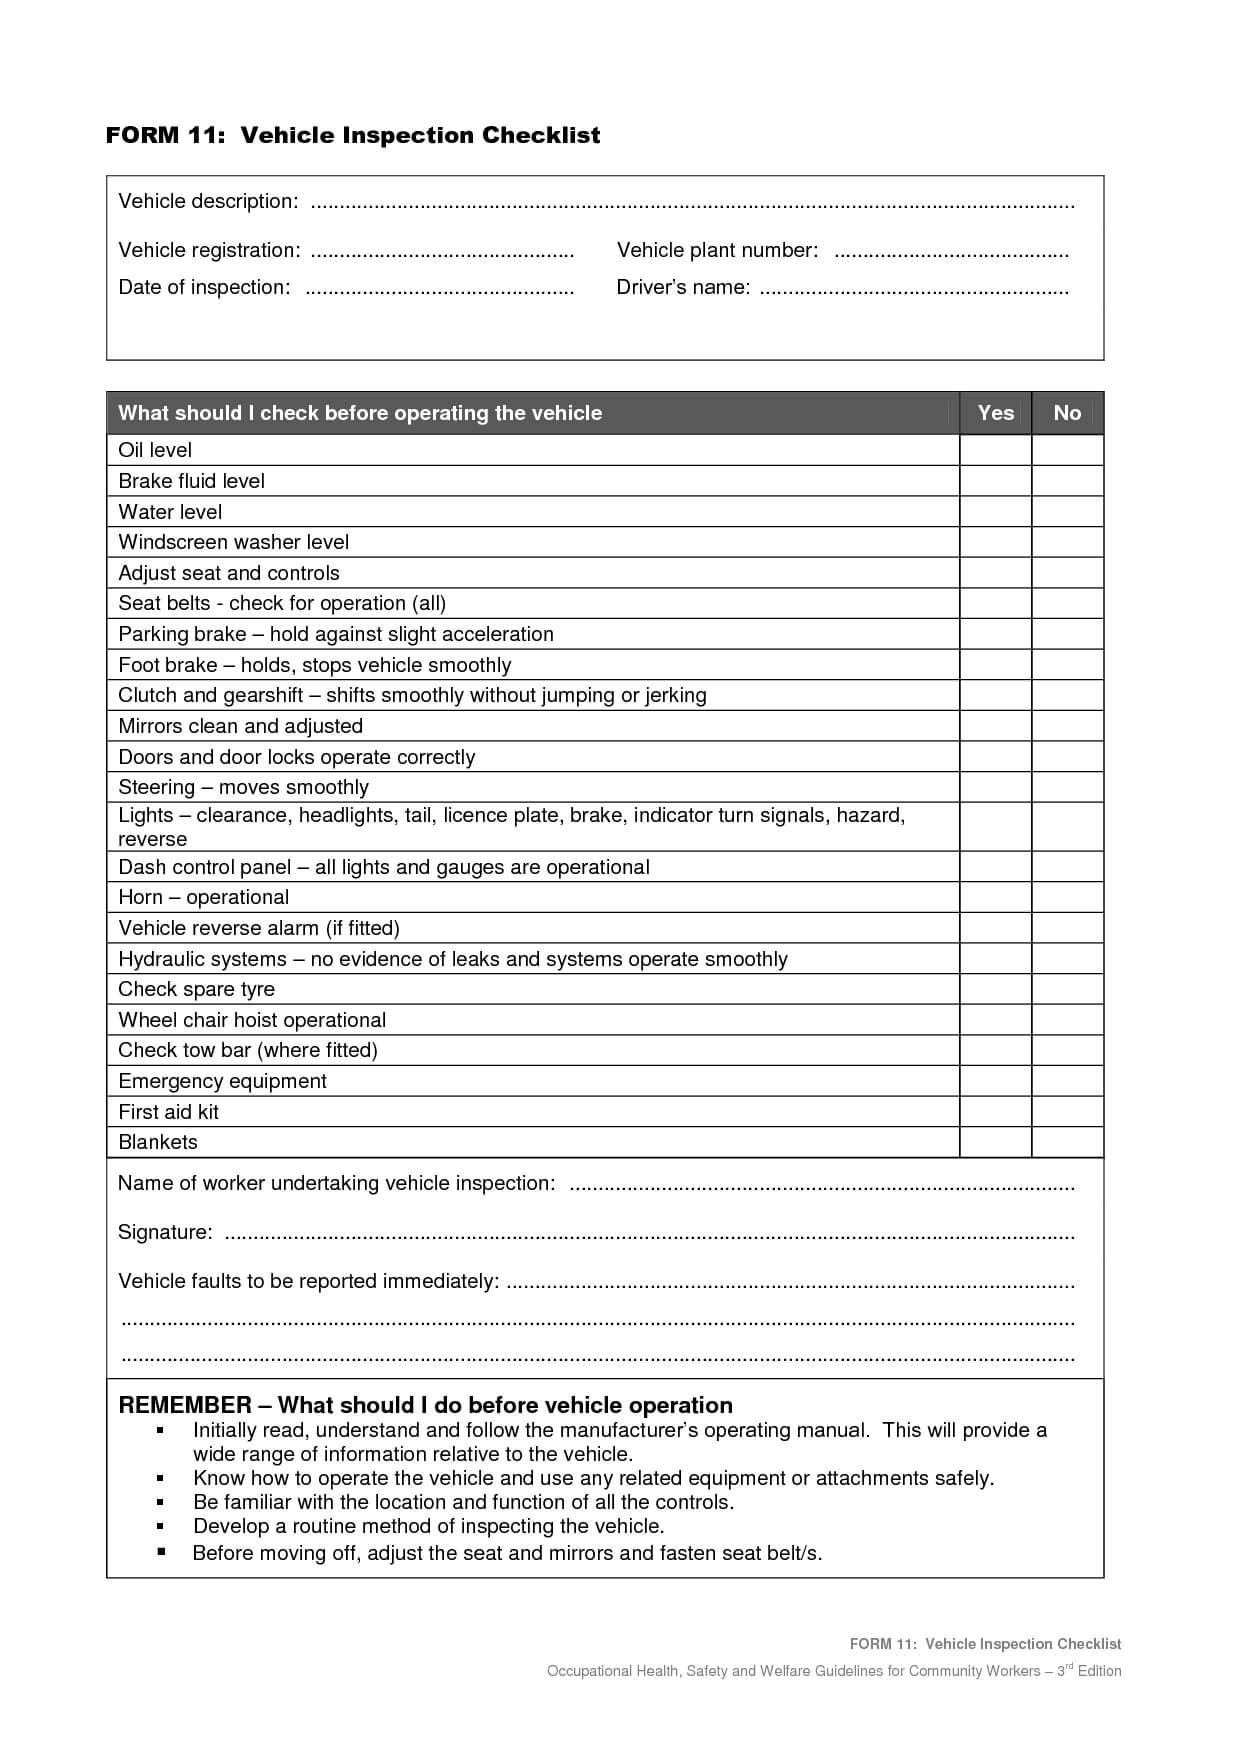 Vehicle Safety Inspection Checklist Form | Vehicle Within Annual Health And Safety Report Template